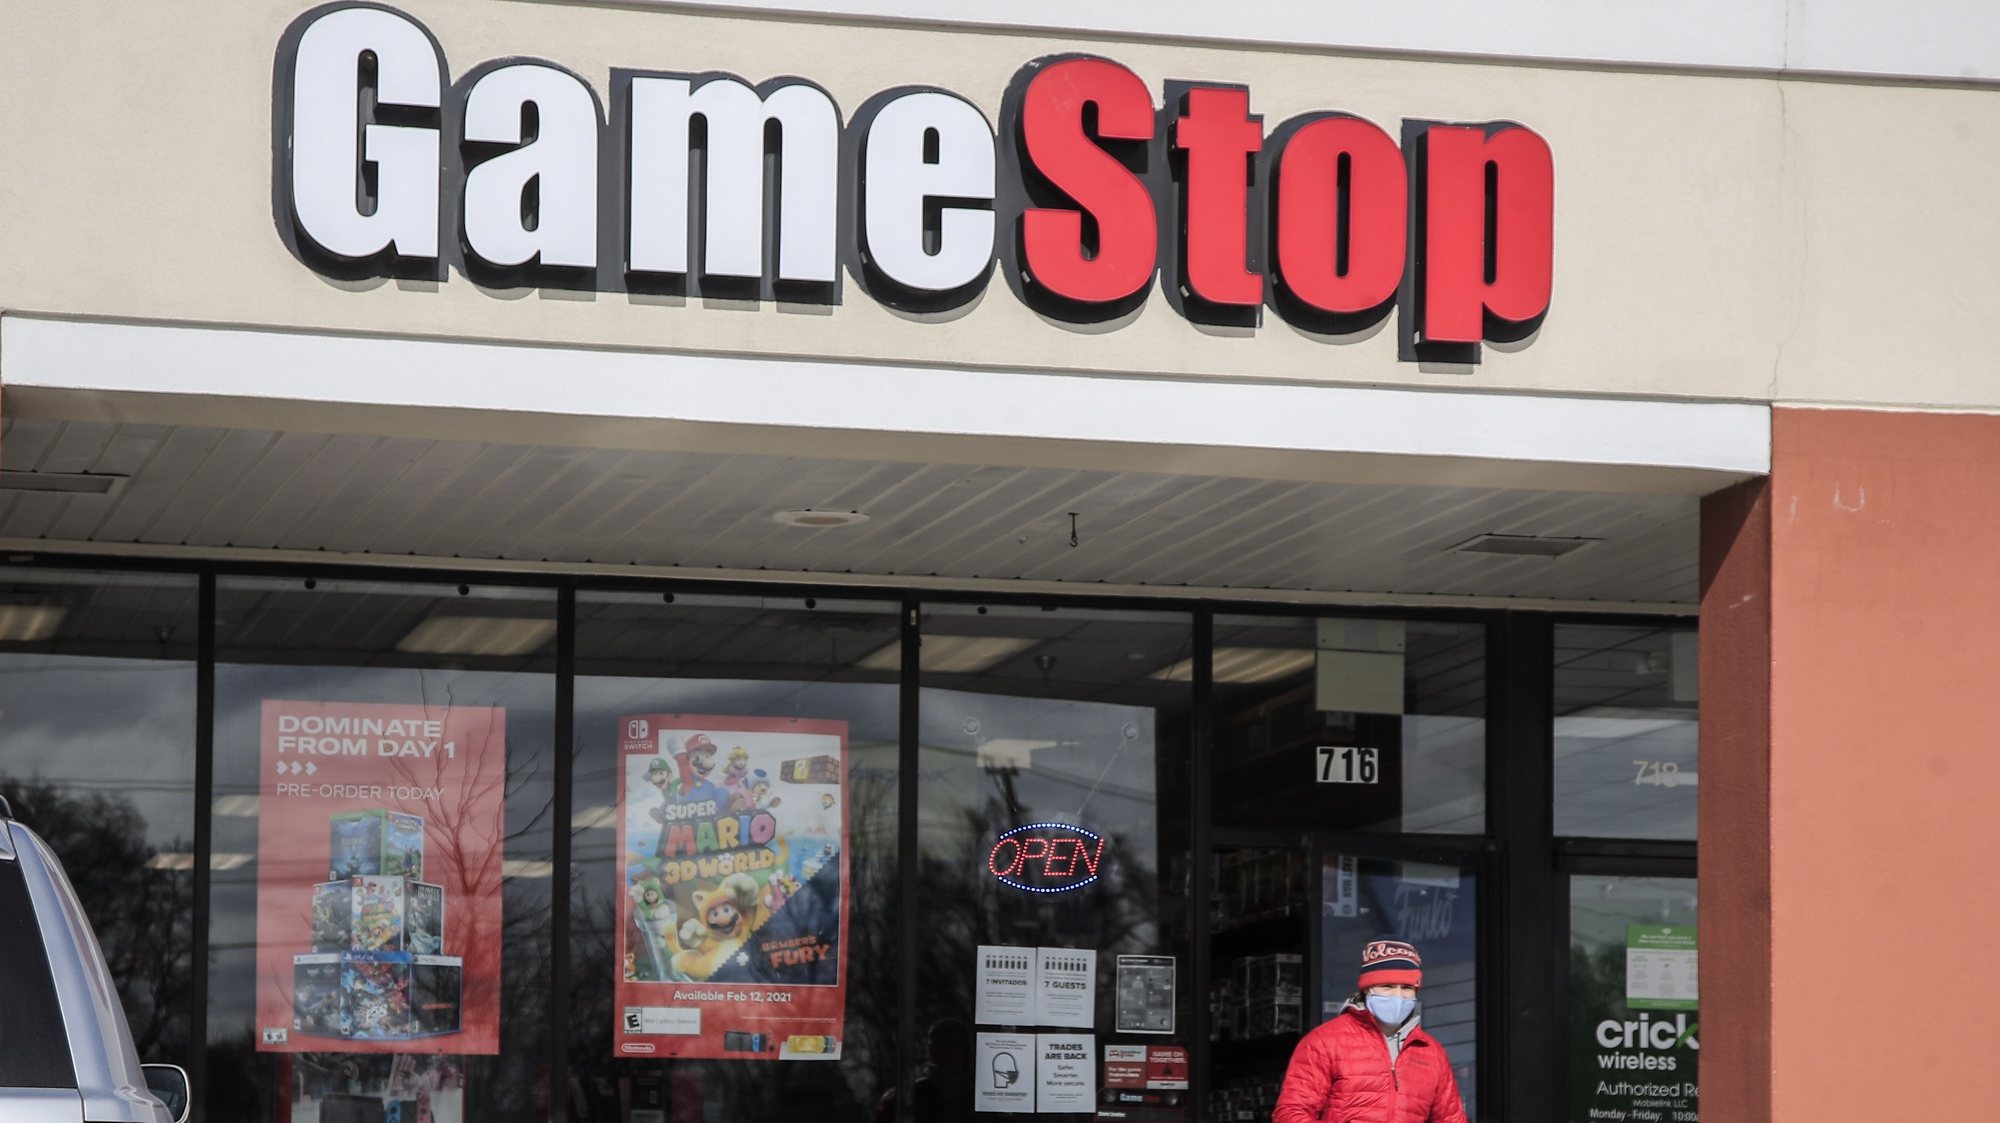 epa08969954 A customer leaves a GameStop store with his purchase in Round Lake Beach, Illinois, USA, 27 January 2021. The electronic game retailer has seen it&#039;s stock price soar from 3.25 US dollars in April 2020 to close at 347.51 US dollars on 27 January. The company has drawn interest from investors in online chat groups and created as much as 3 billion US dollars in value losses for short sellers.  EPA/TANNEN MAURY